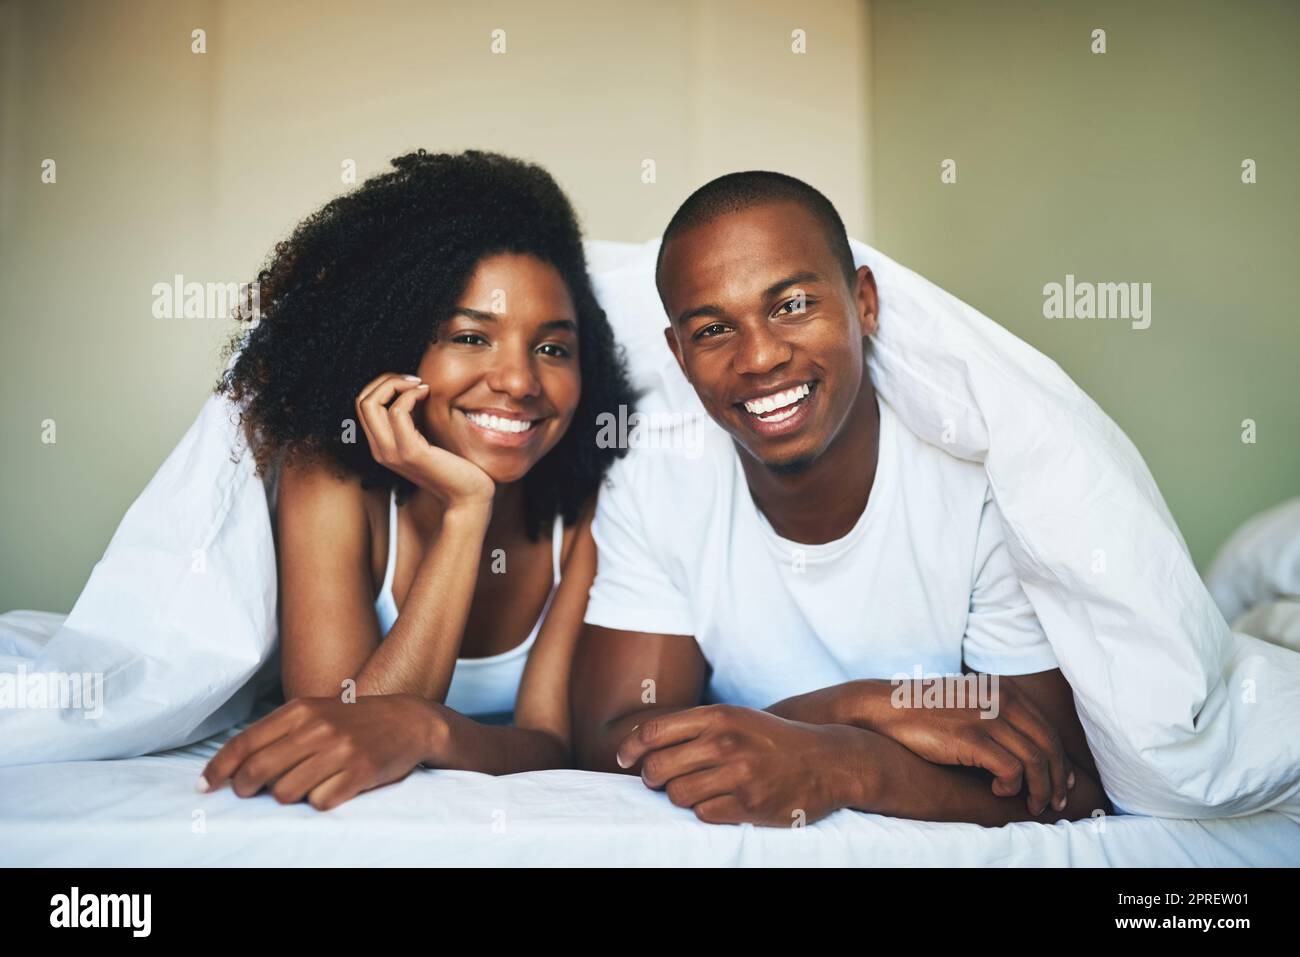 Love starts the day with a smile. Portrait of a happy young couple relaxing under a duvet in their bedroom. Stock Photo